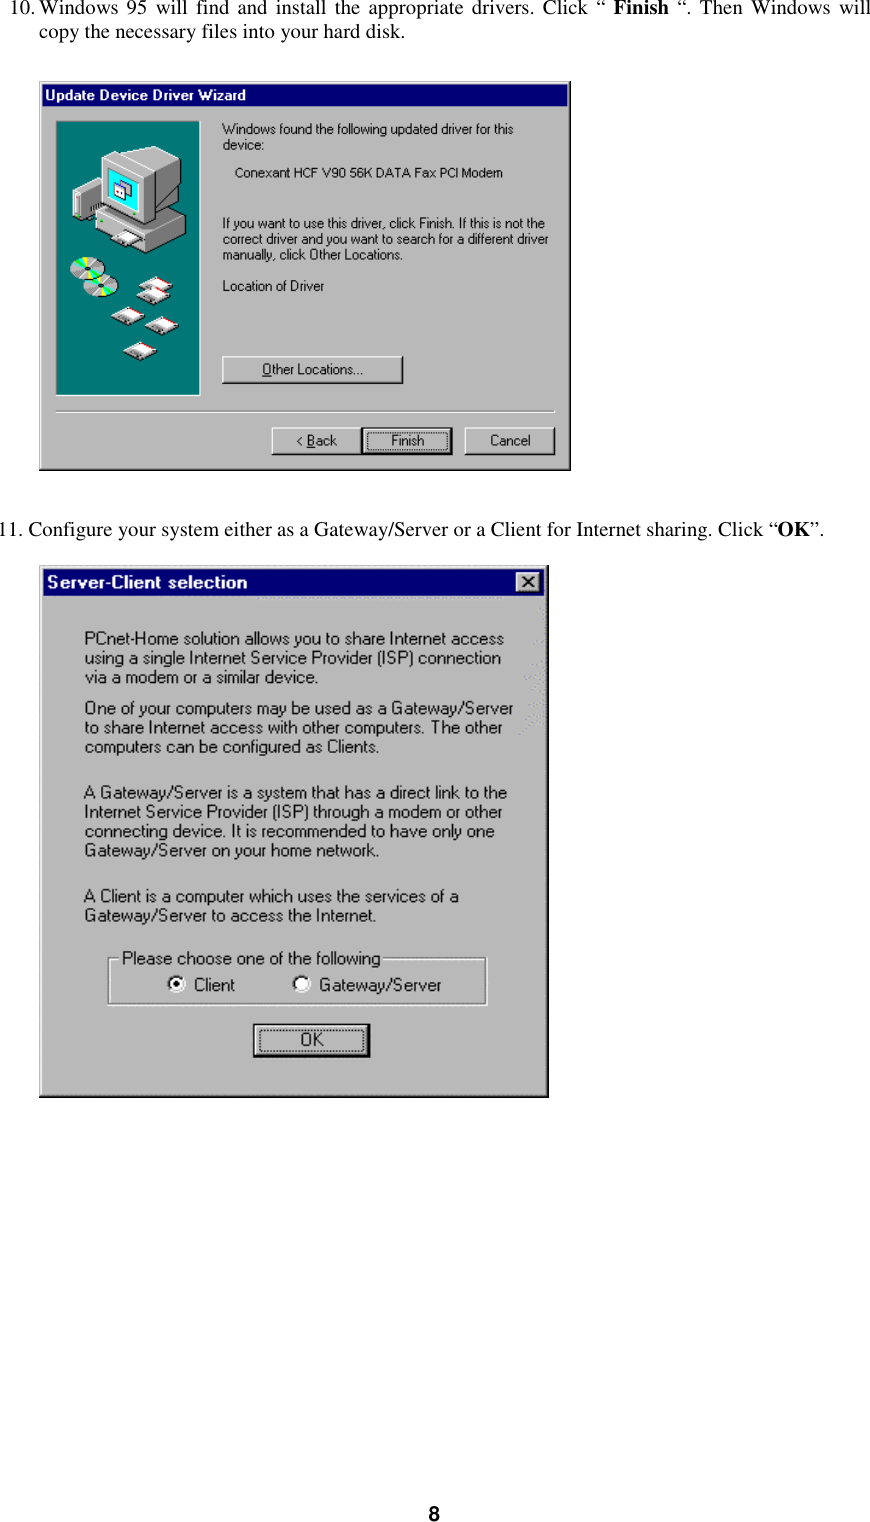 810. Windows 95 will find and install the appropriate drivers. Click “ Finish “. Then Windows willcopy the necessary files into your hard disk.11. Configure your system either as a Gateway/Server or a Client for Internet sharing. Click “OK”.